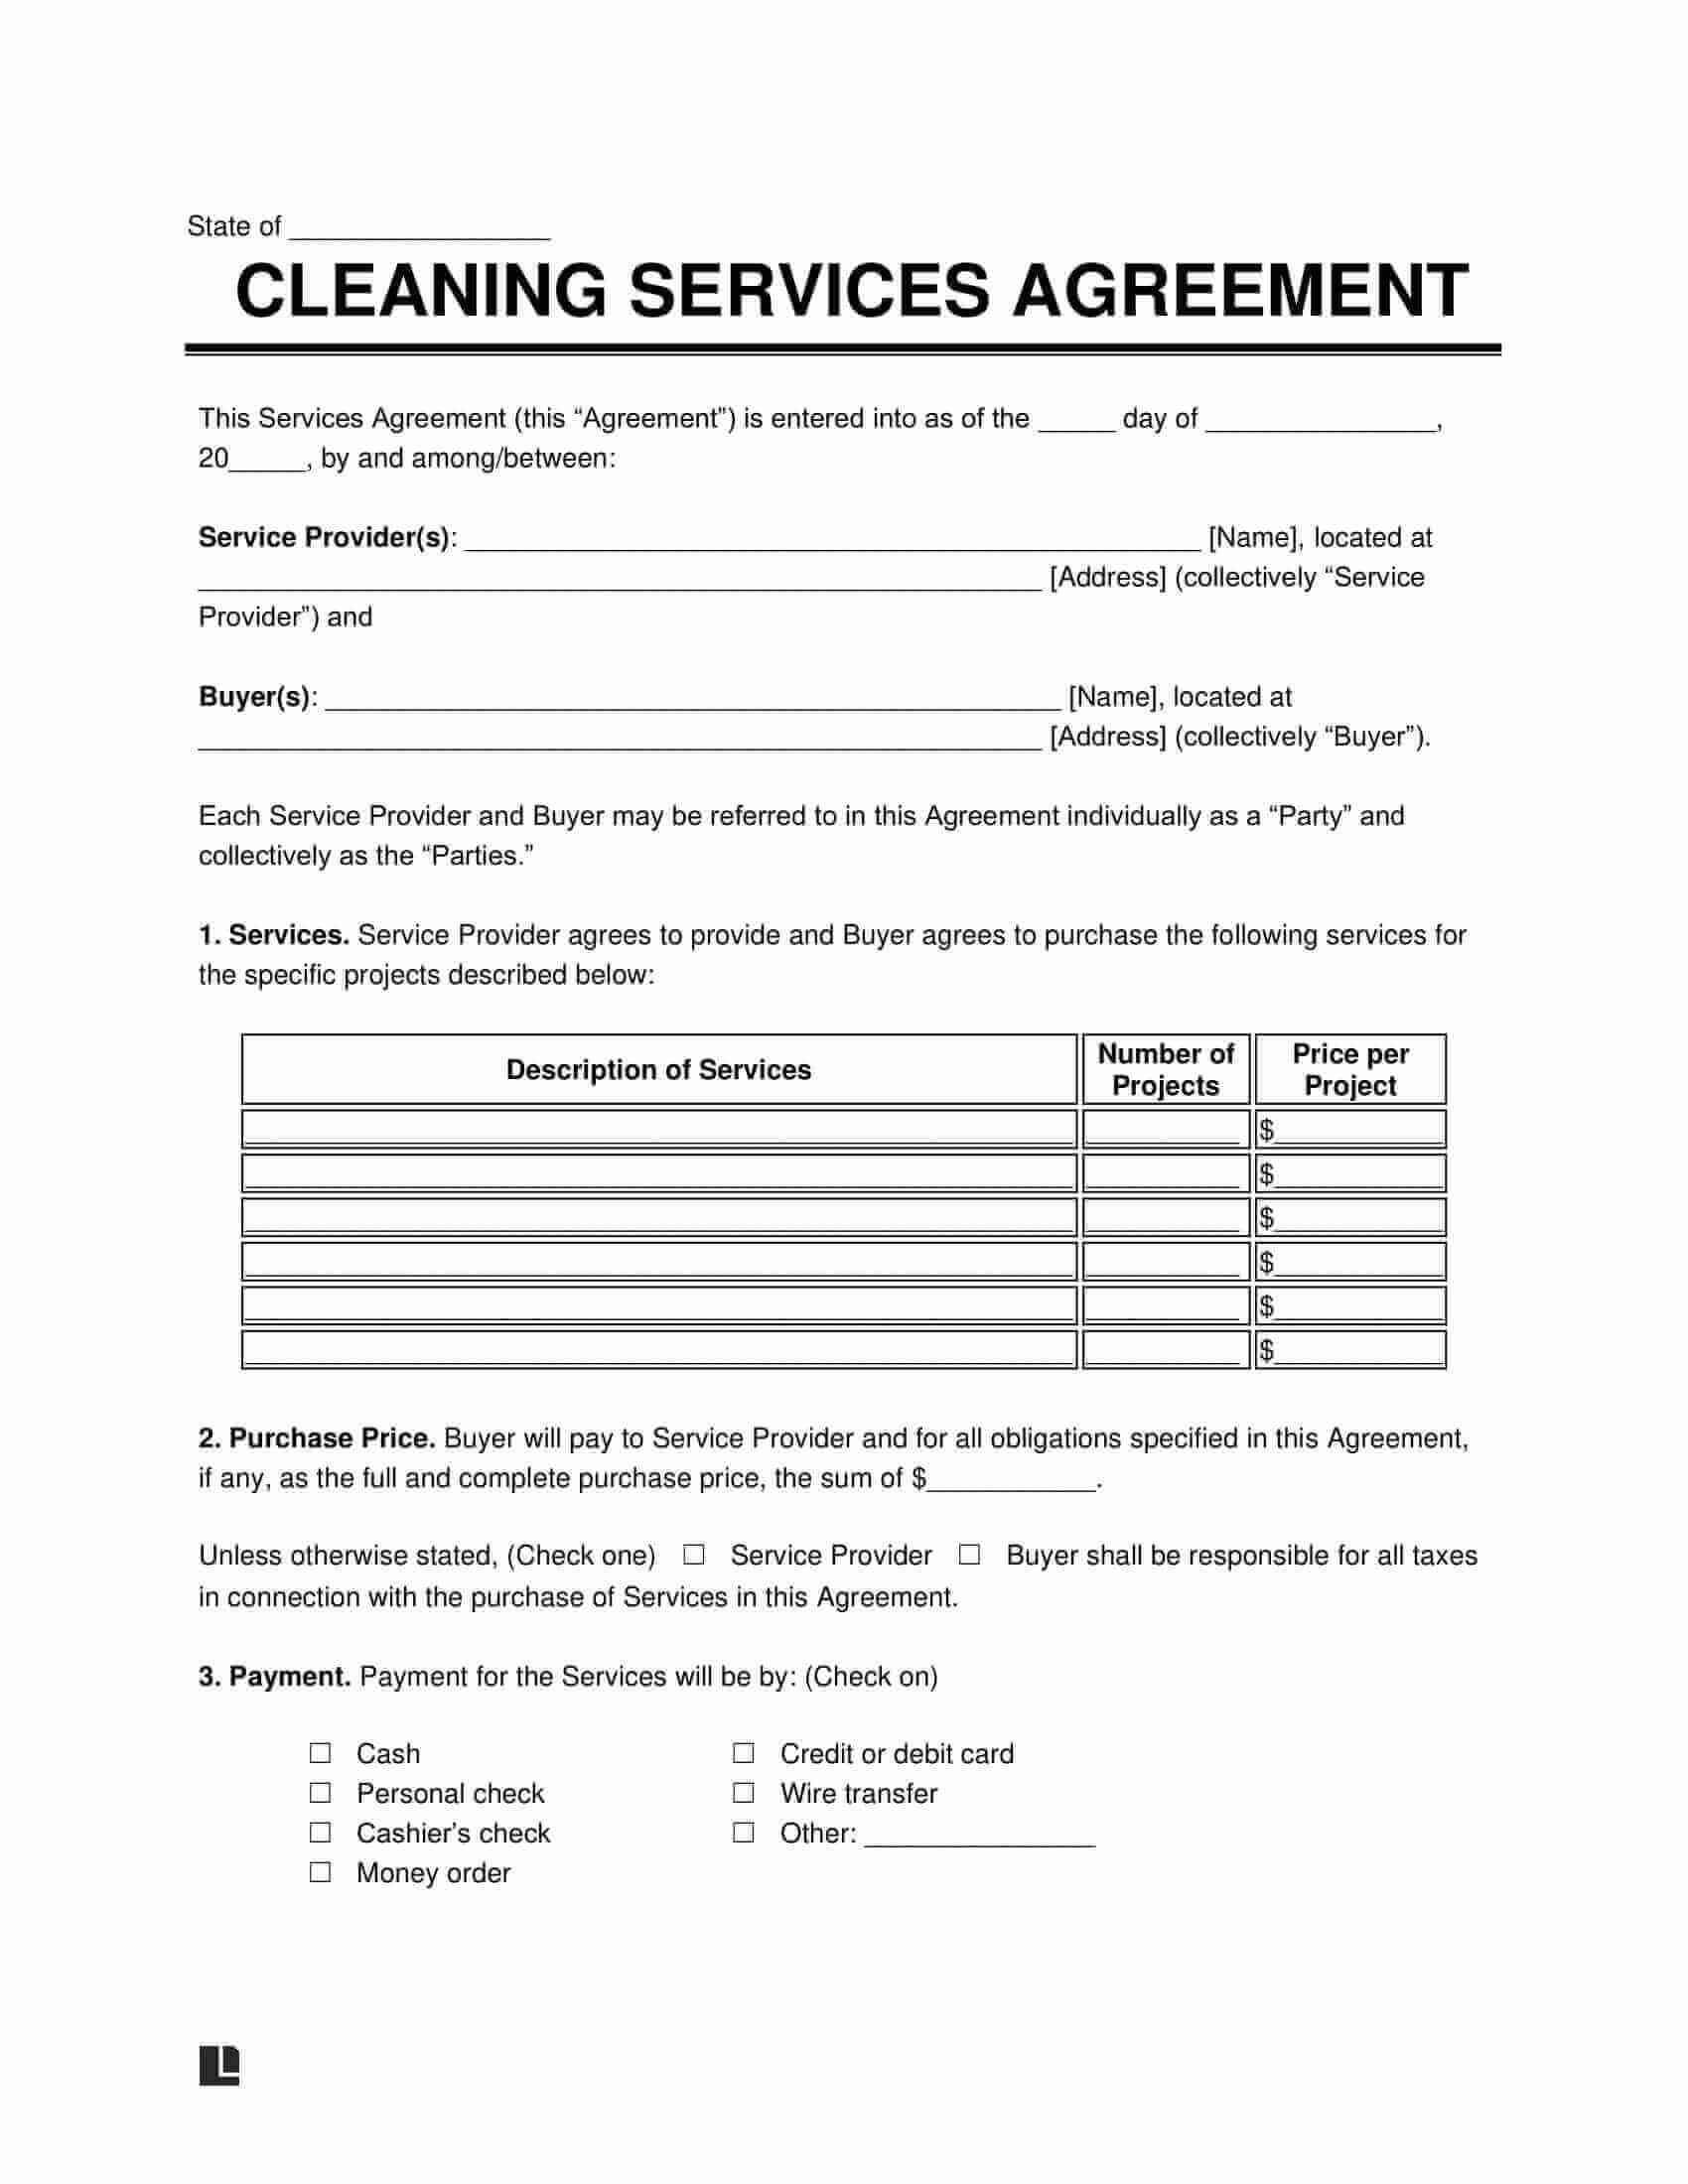 cleaning-service-agreement